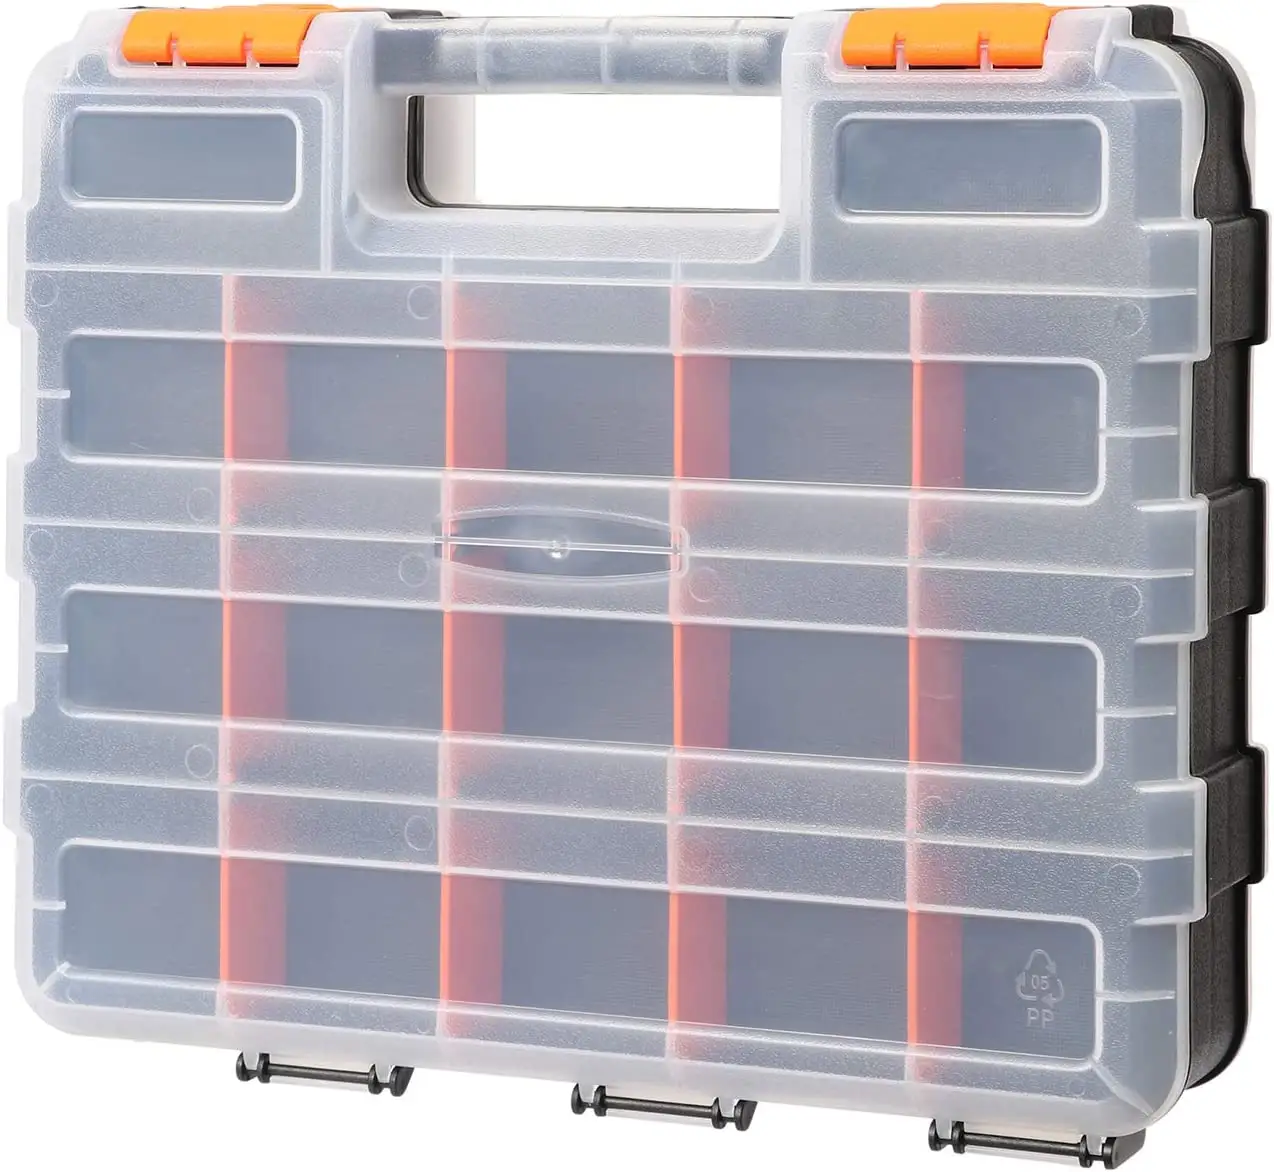 MP011 customizable removable plastic dividers hardware storage double side tools box organizer with 34-compartment